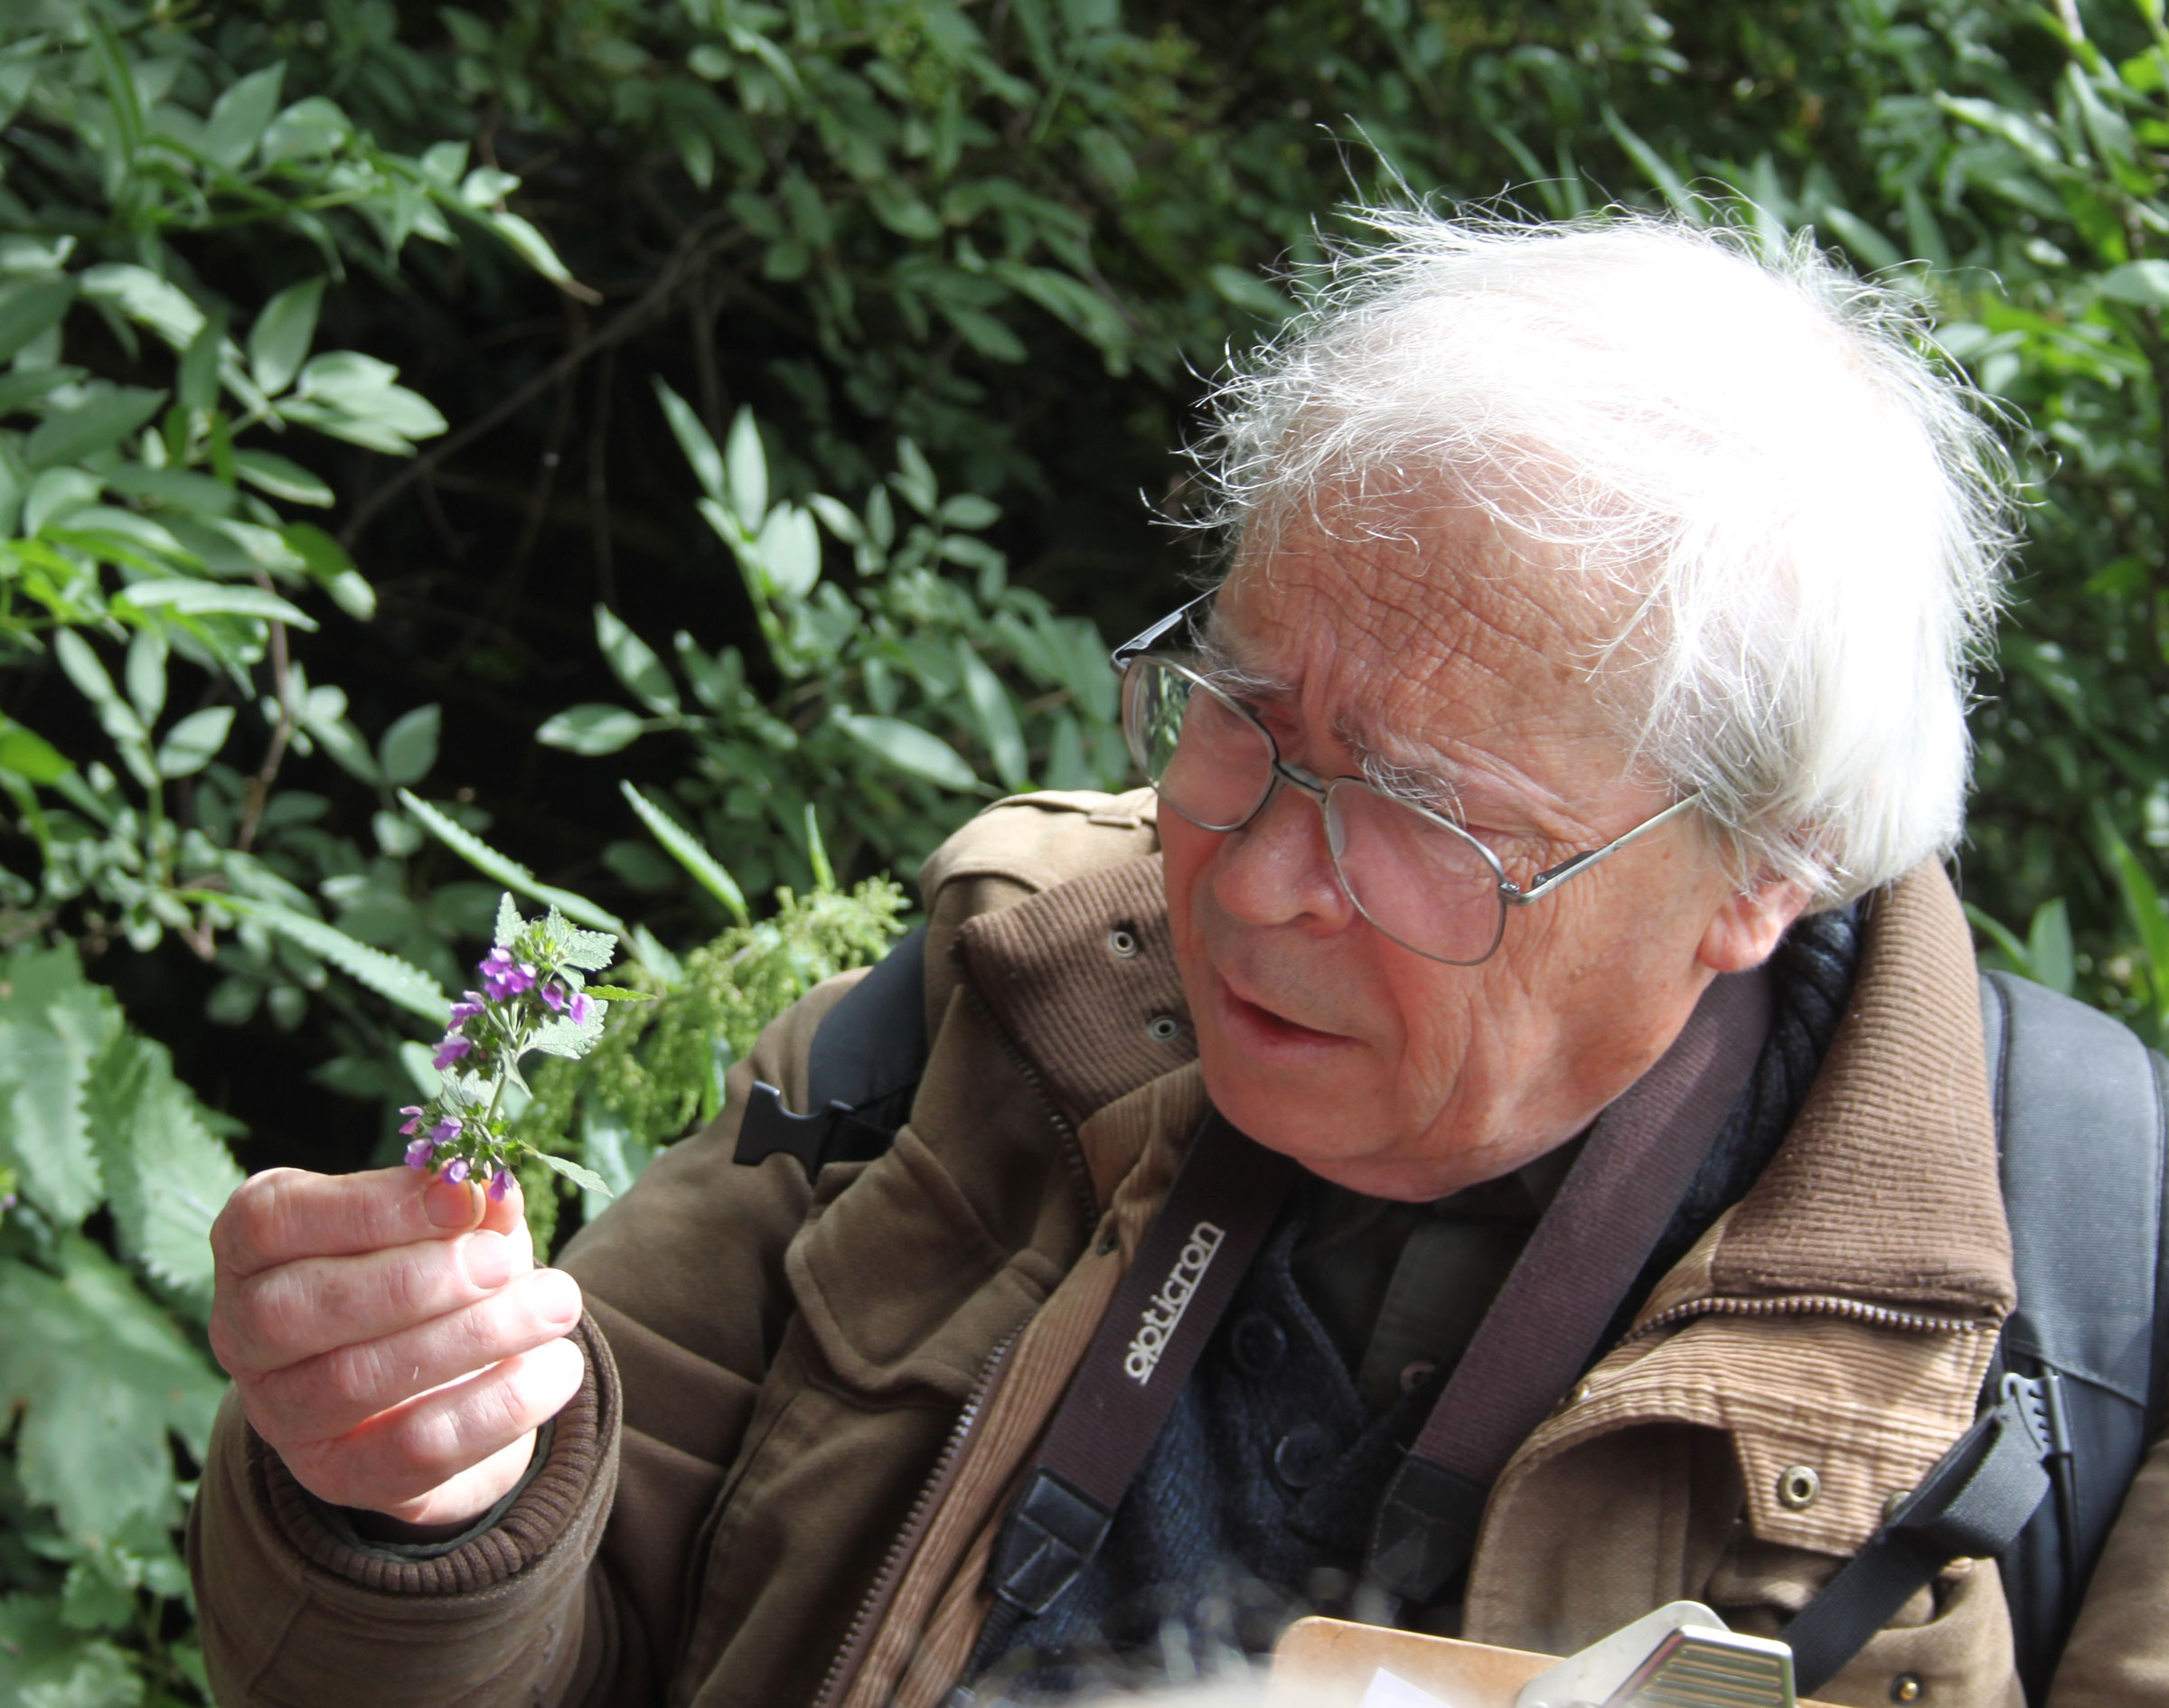 1n 2015, botanist and former conservation officer, David Bevan, carried out a flora survey over the length of the Parkland Walk that remains the most up-to-date record currently available.